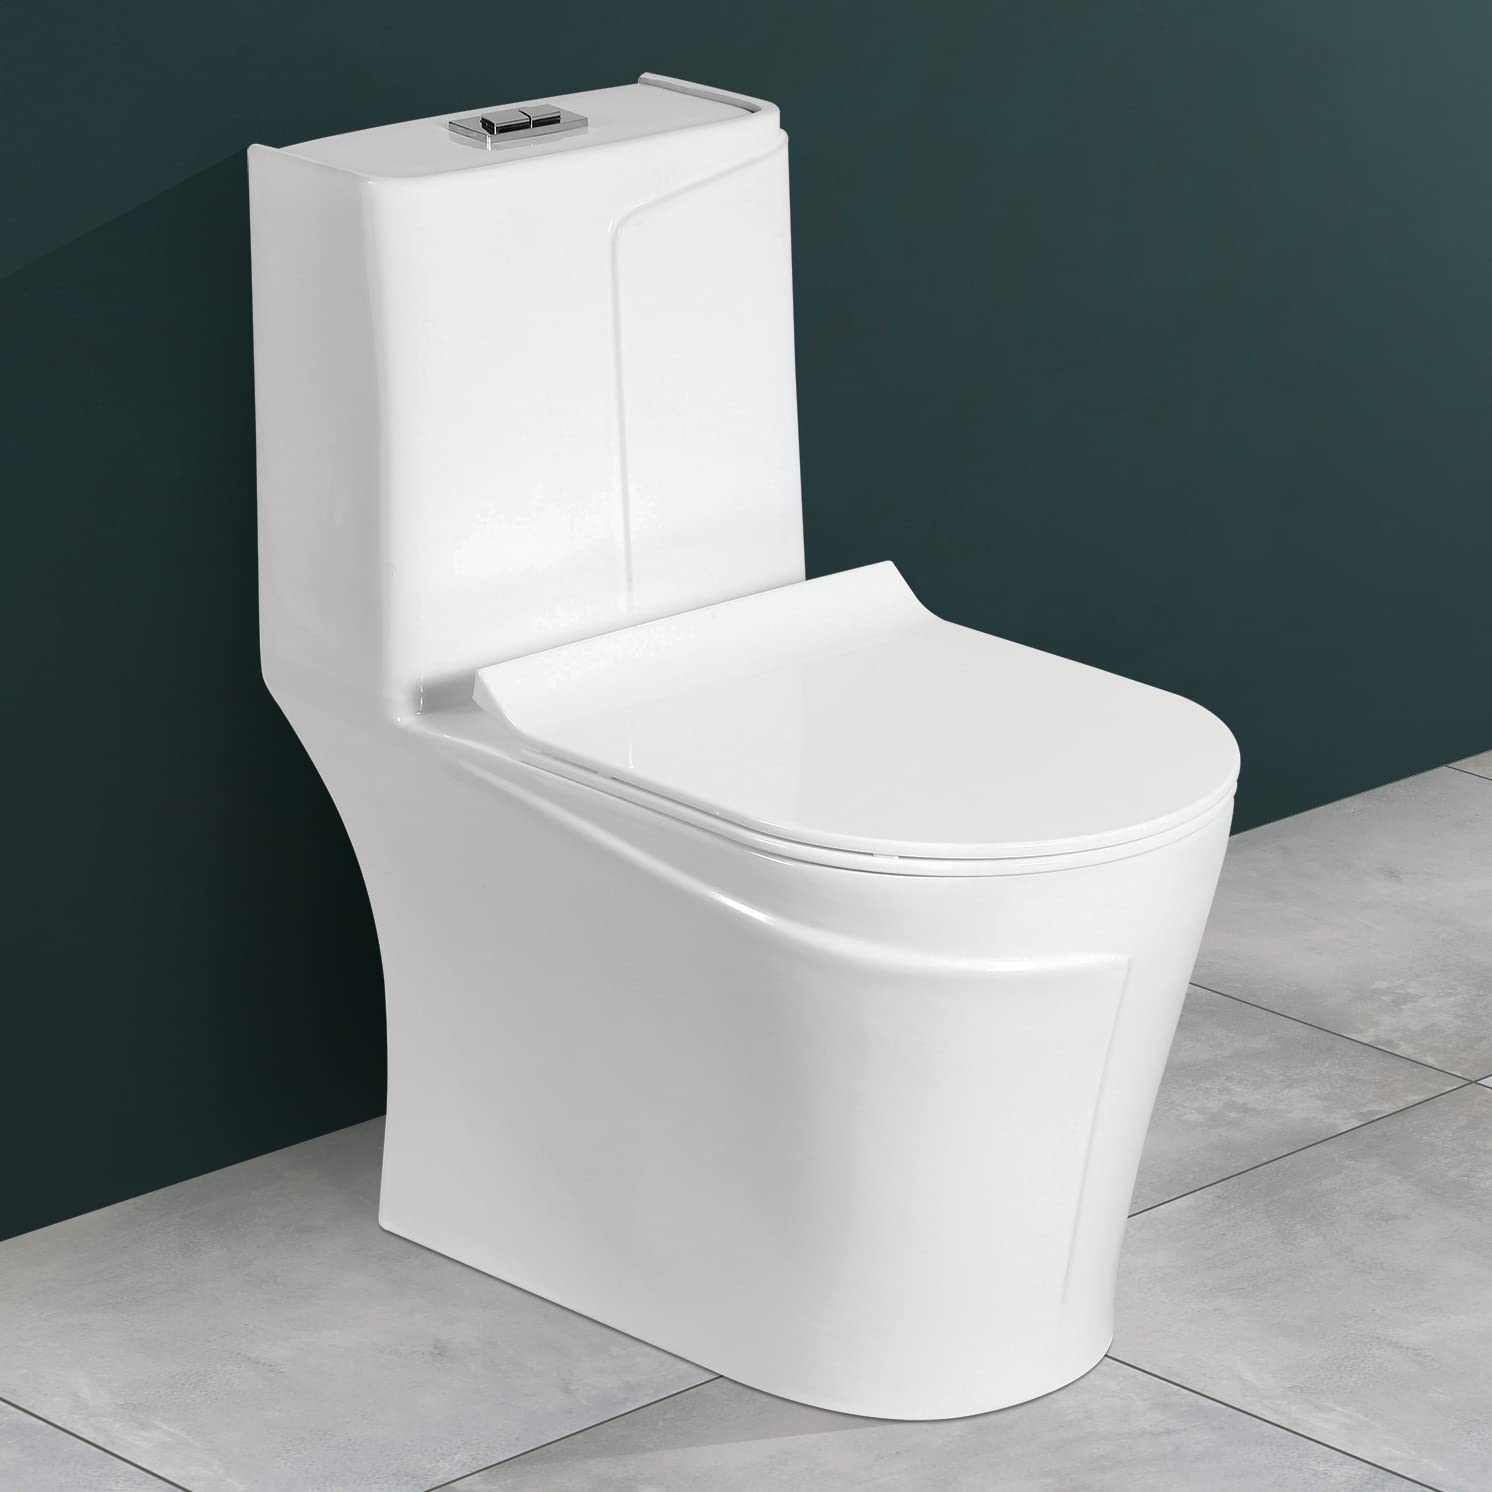 Plantex Platinium Ceramic One Piece Western Toilet/Water Closet/Commode With Soft Close Toilet Seat - S Trap Outlet (APS-747, White)